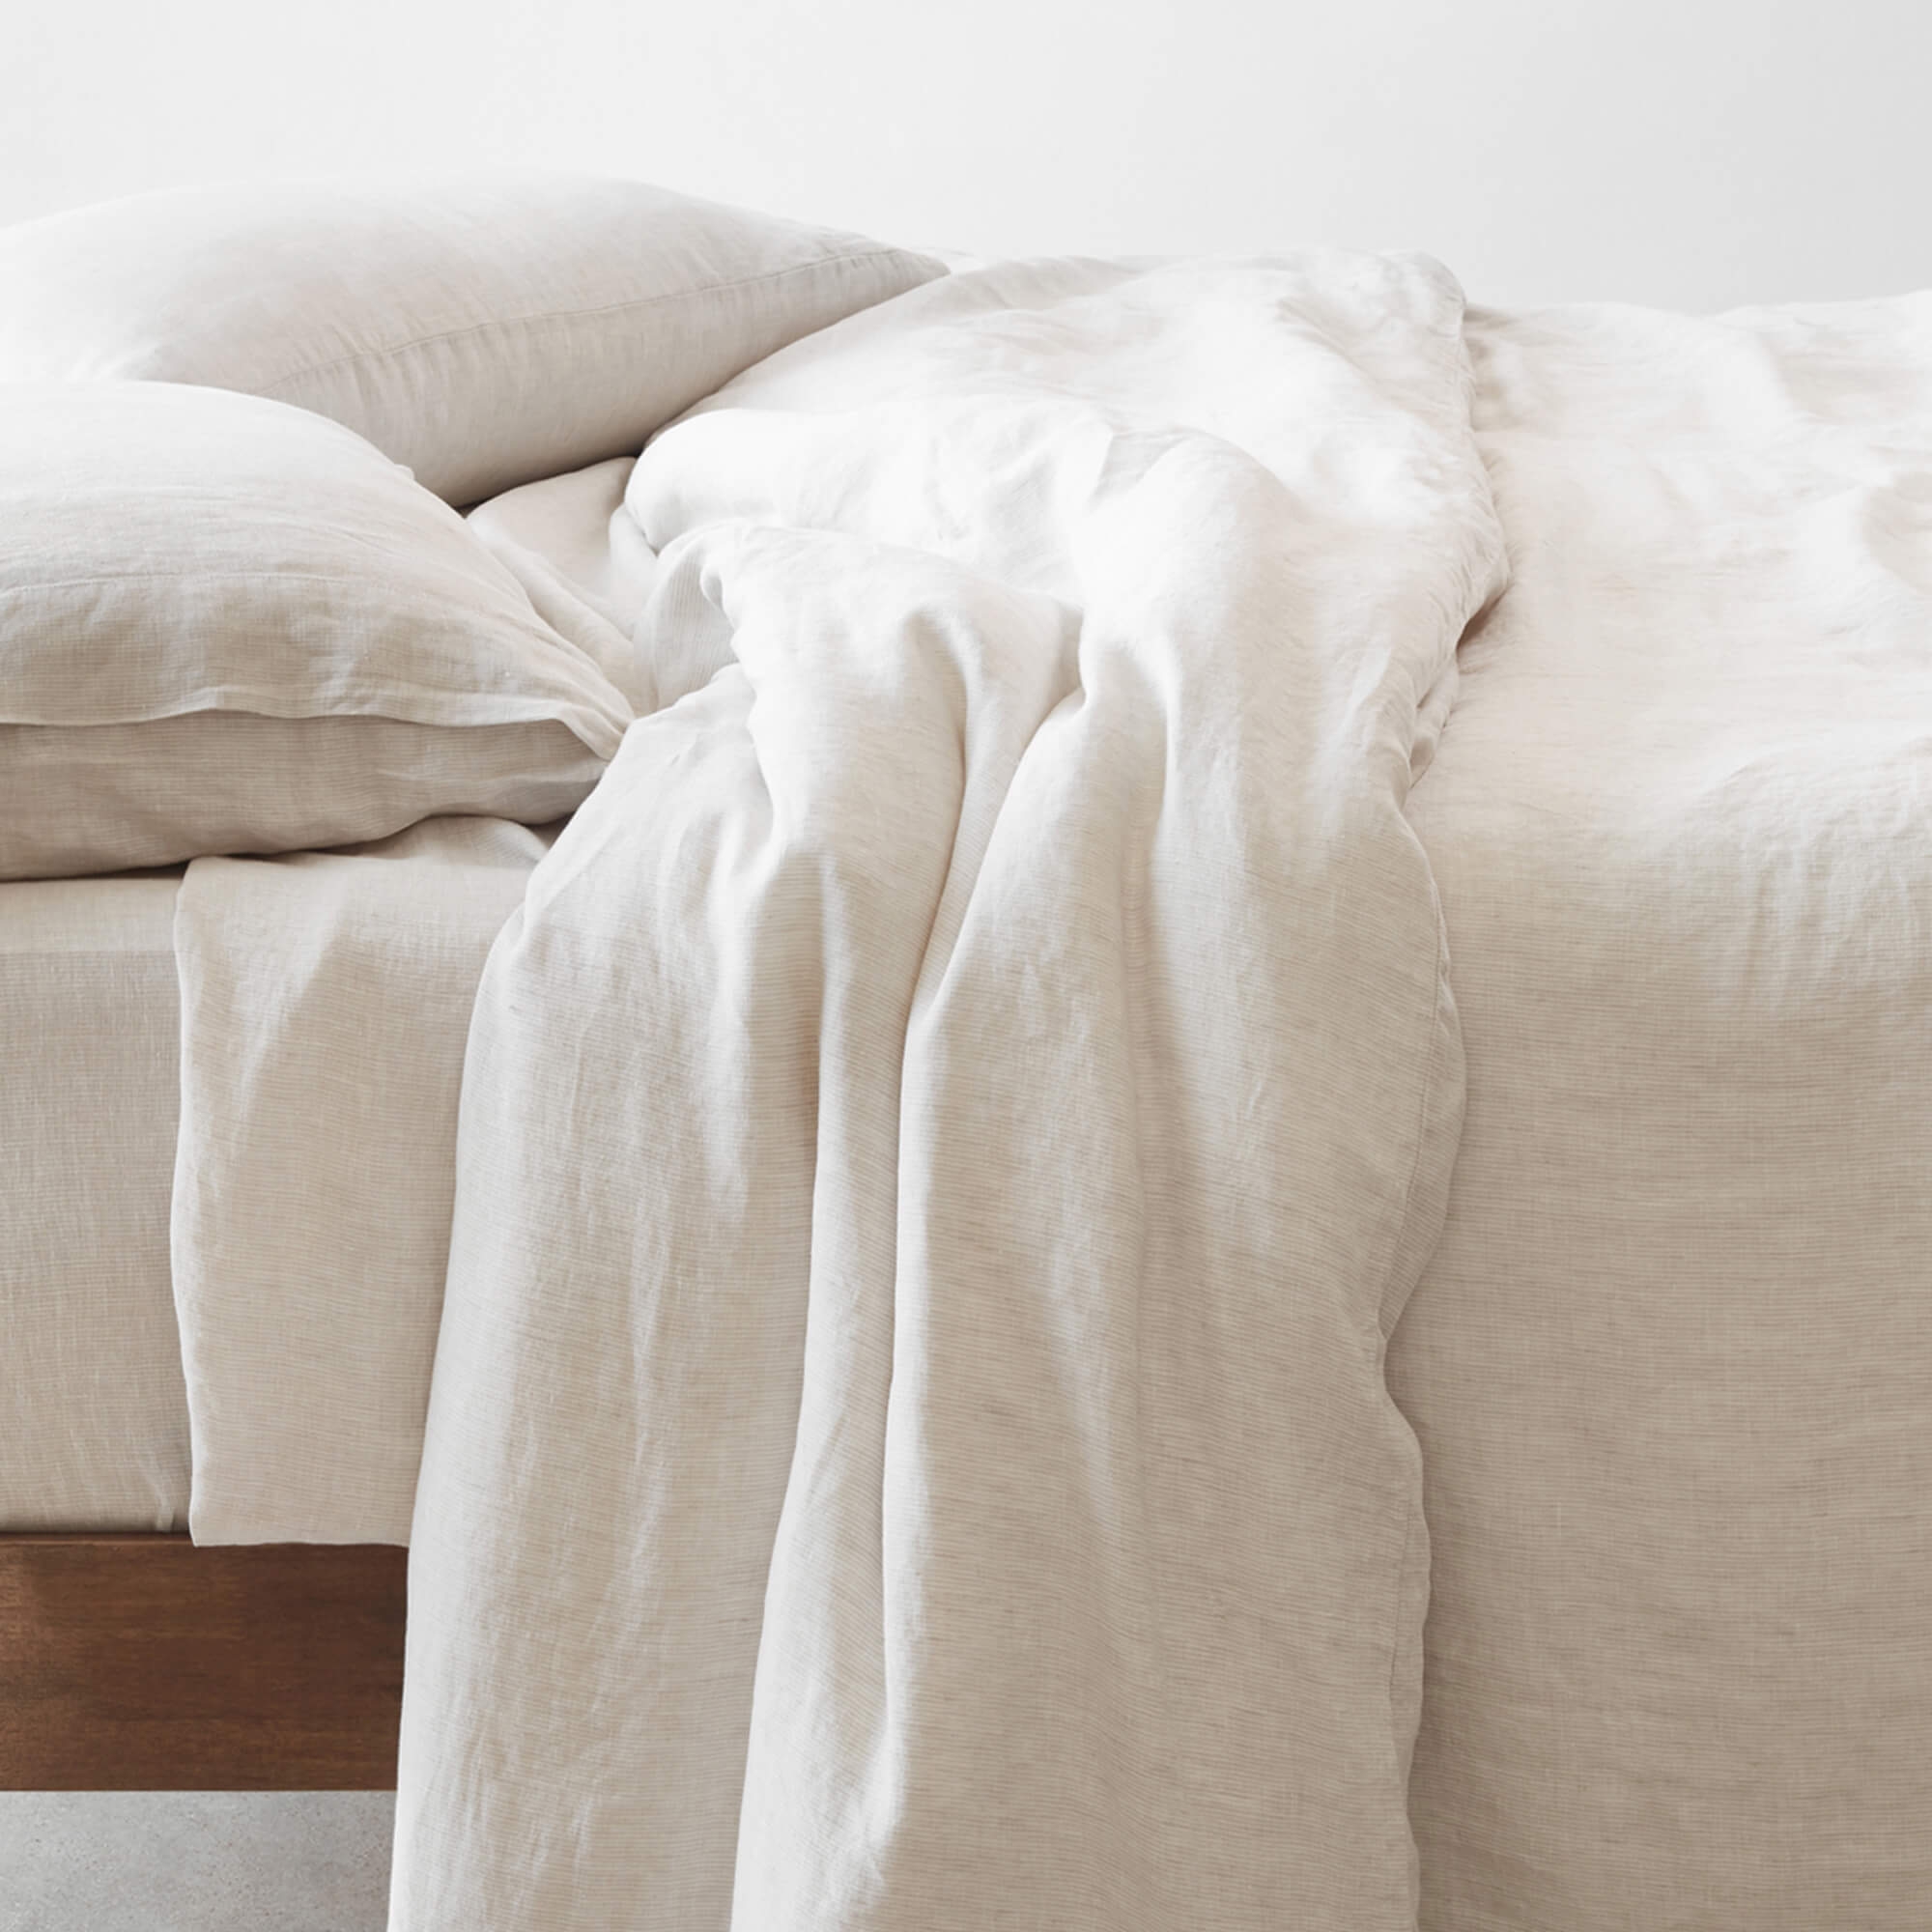 The Citizenry Stonewashed Linen Duvet Cover | Full/Queen | Duvet Only | Sand - Image 0